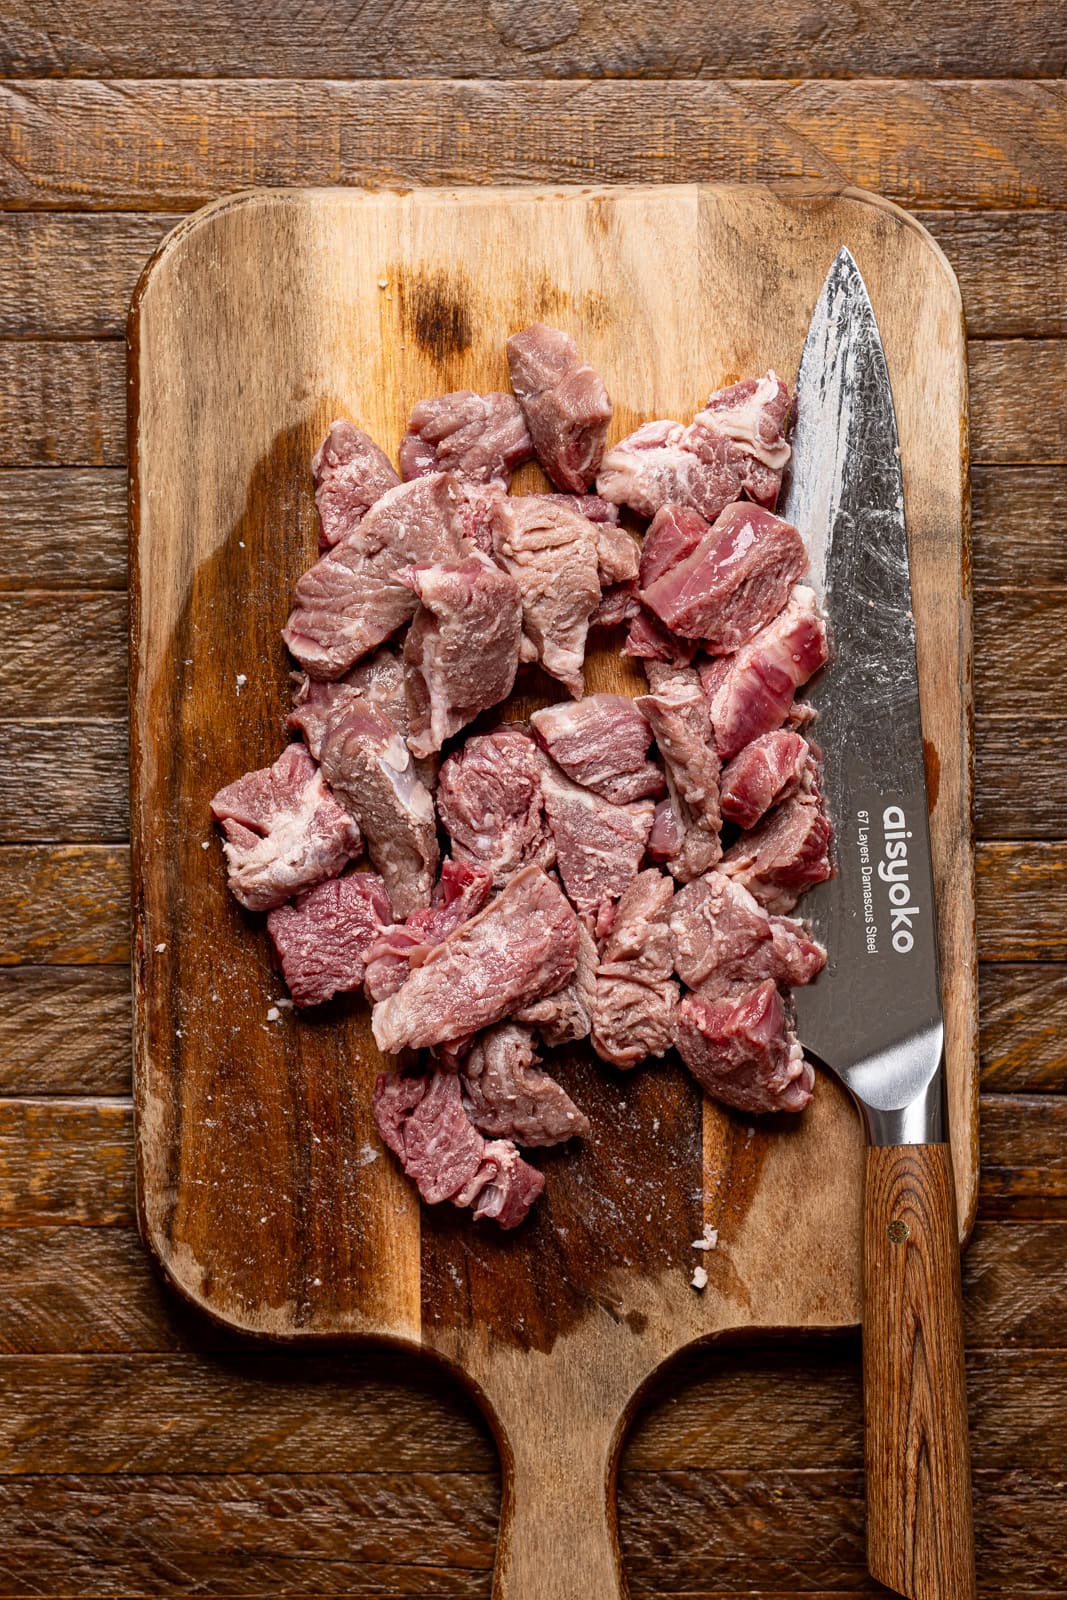 Ribeye steak being chopped into chunks on a cutting board with a knife.